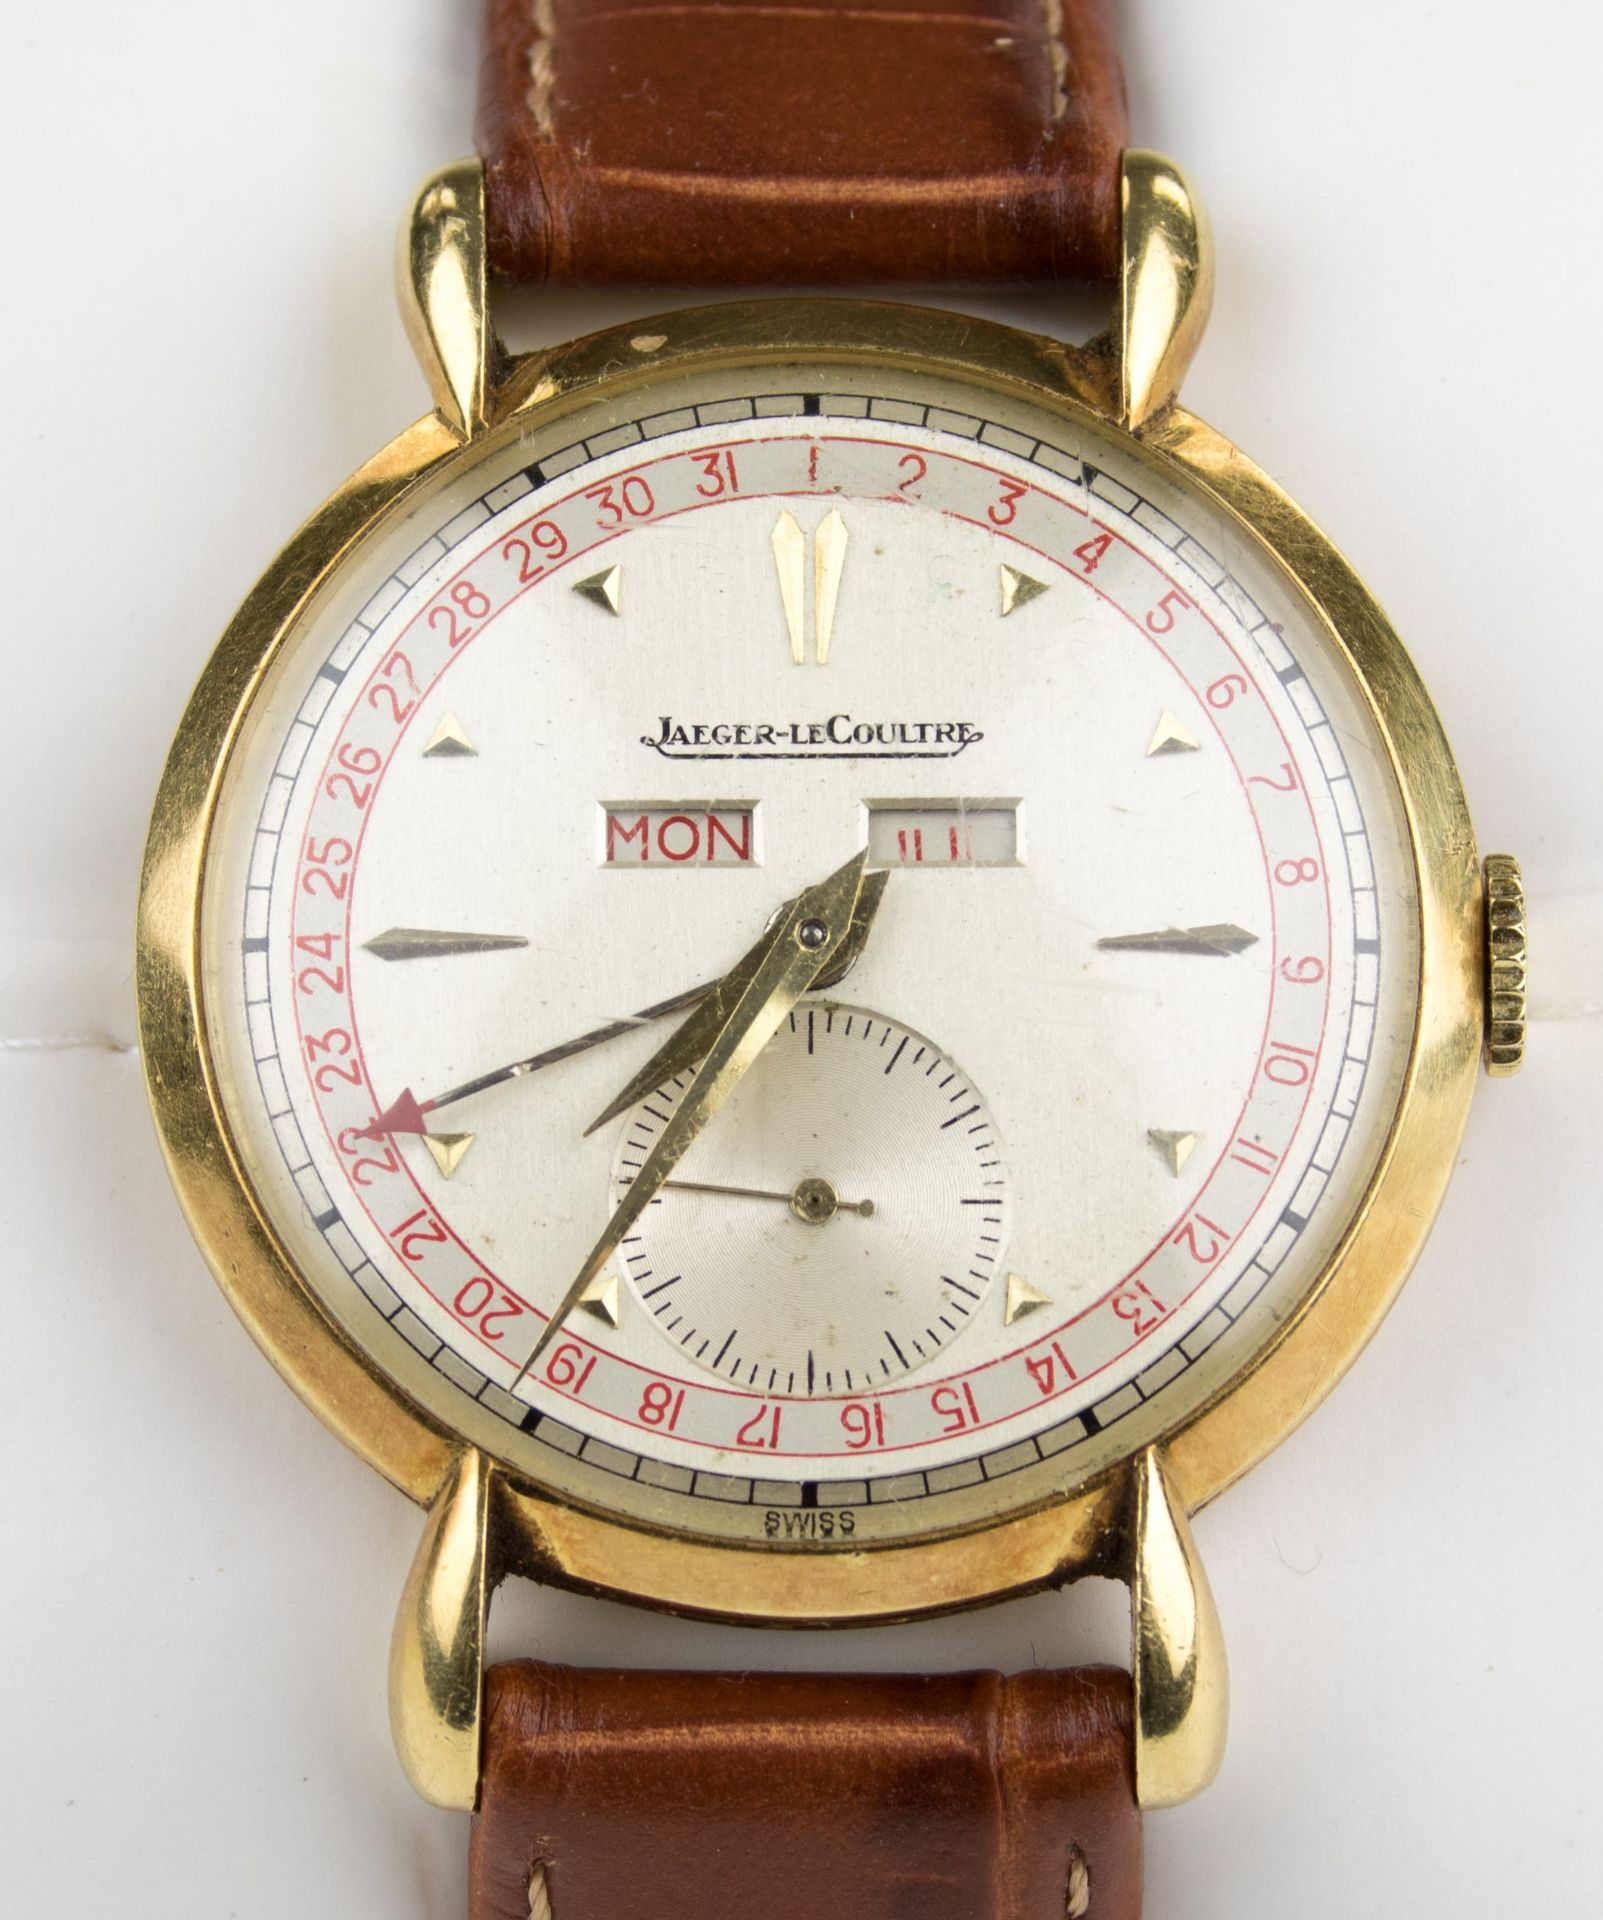 WARTIME JAEGER-LECOULTRE TRIPLE DATE OWNED BY CIC LT. ROBERT O'NEIL - Image 2 of 6